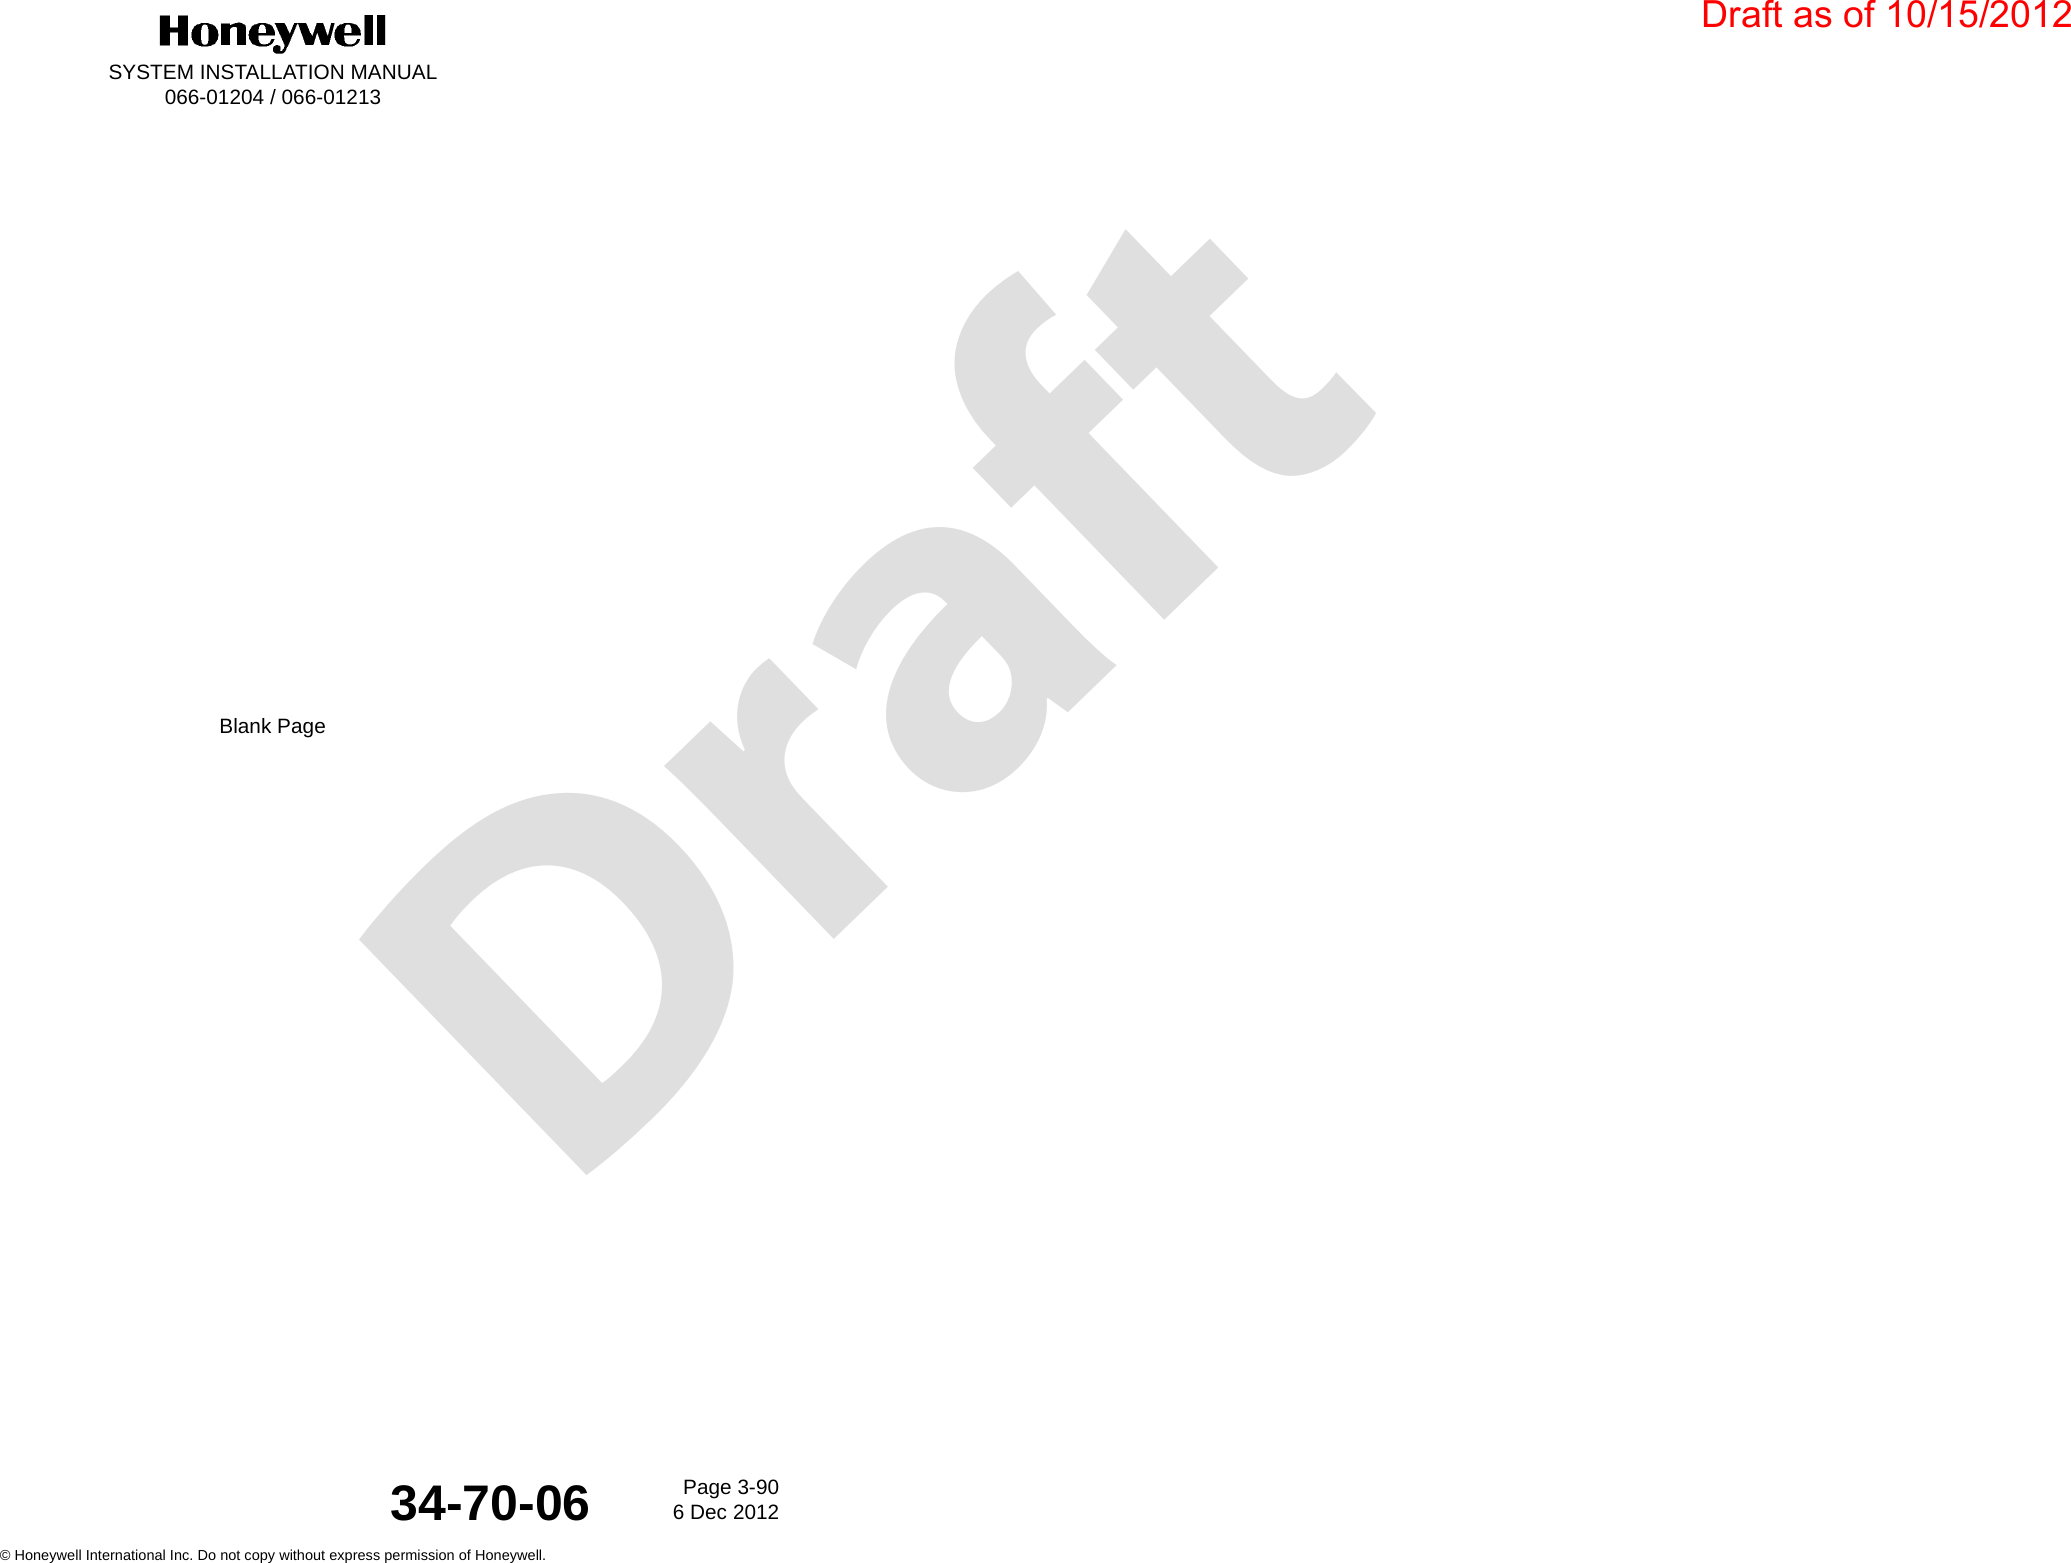 DraftSYSTEM INSTALLATION MANUAL066-01204 / 066-01213Page 3-906 Dec 2012© Honeywell International Inc. Do not copy without express permission of Honeywell.34-70-06Blank PageDraft as of 10/15/2012